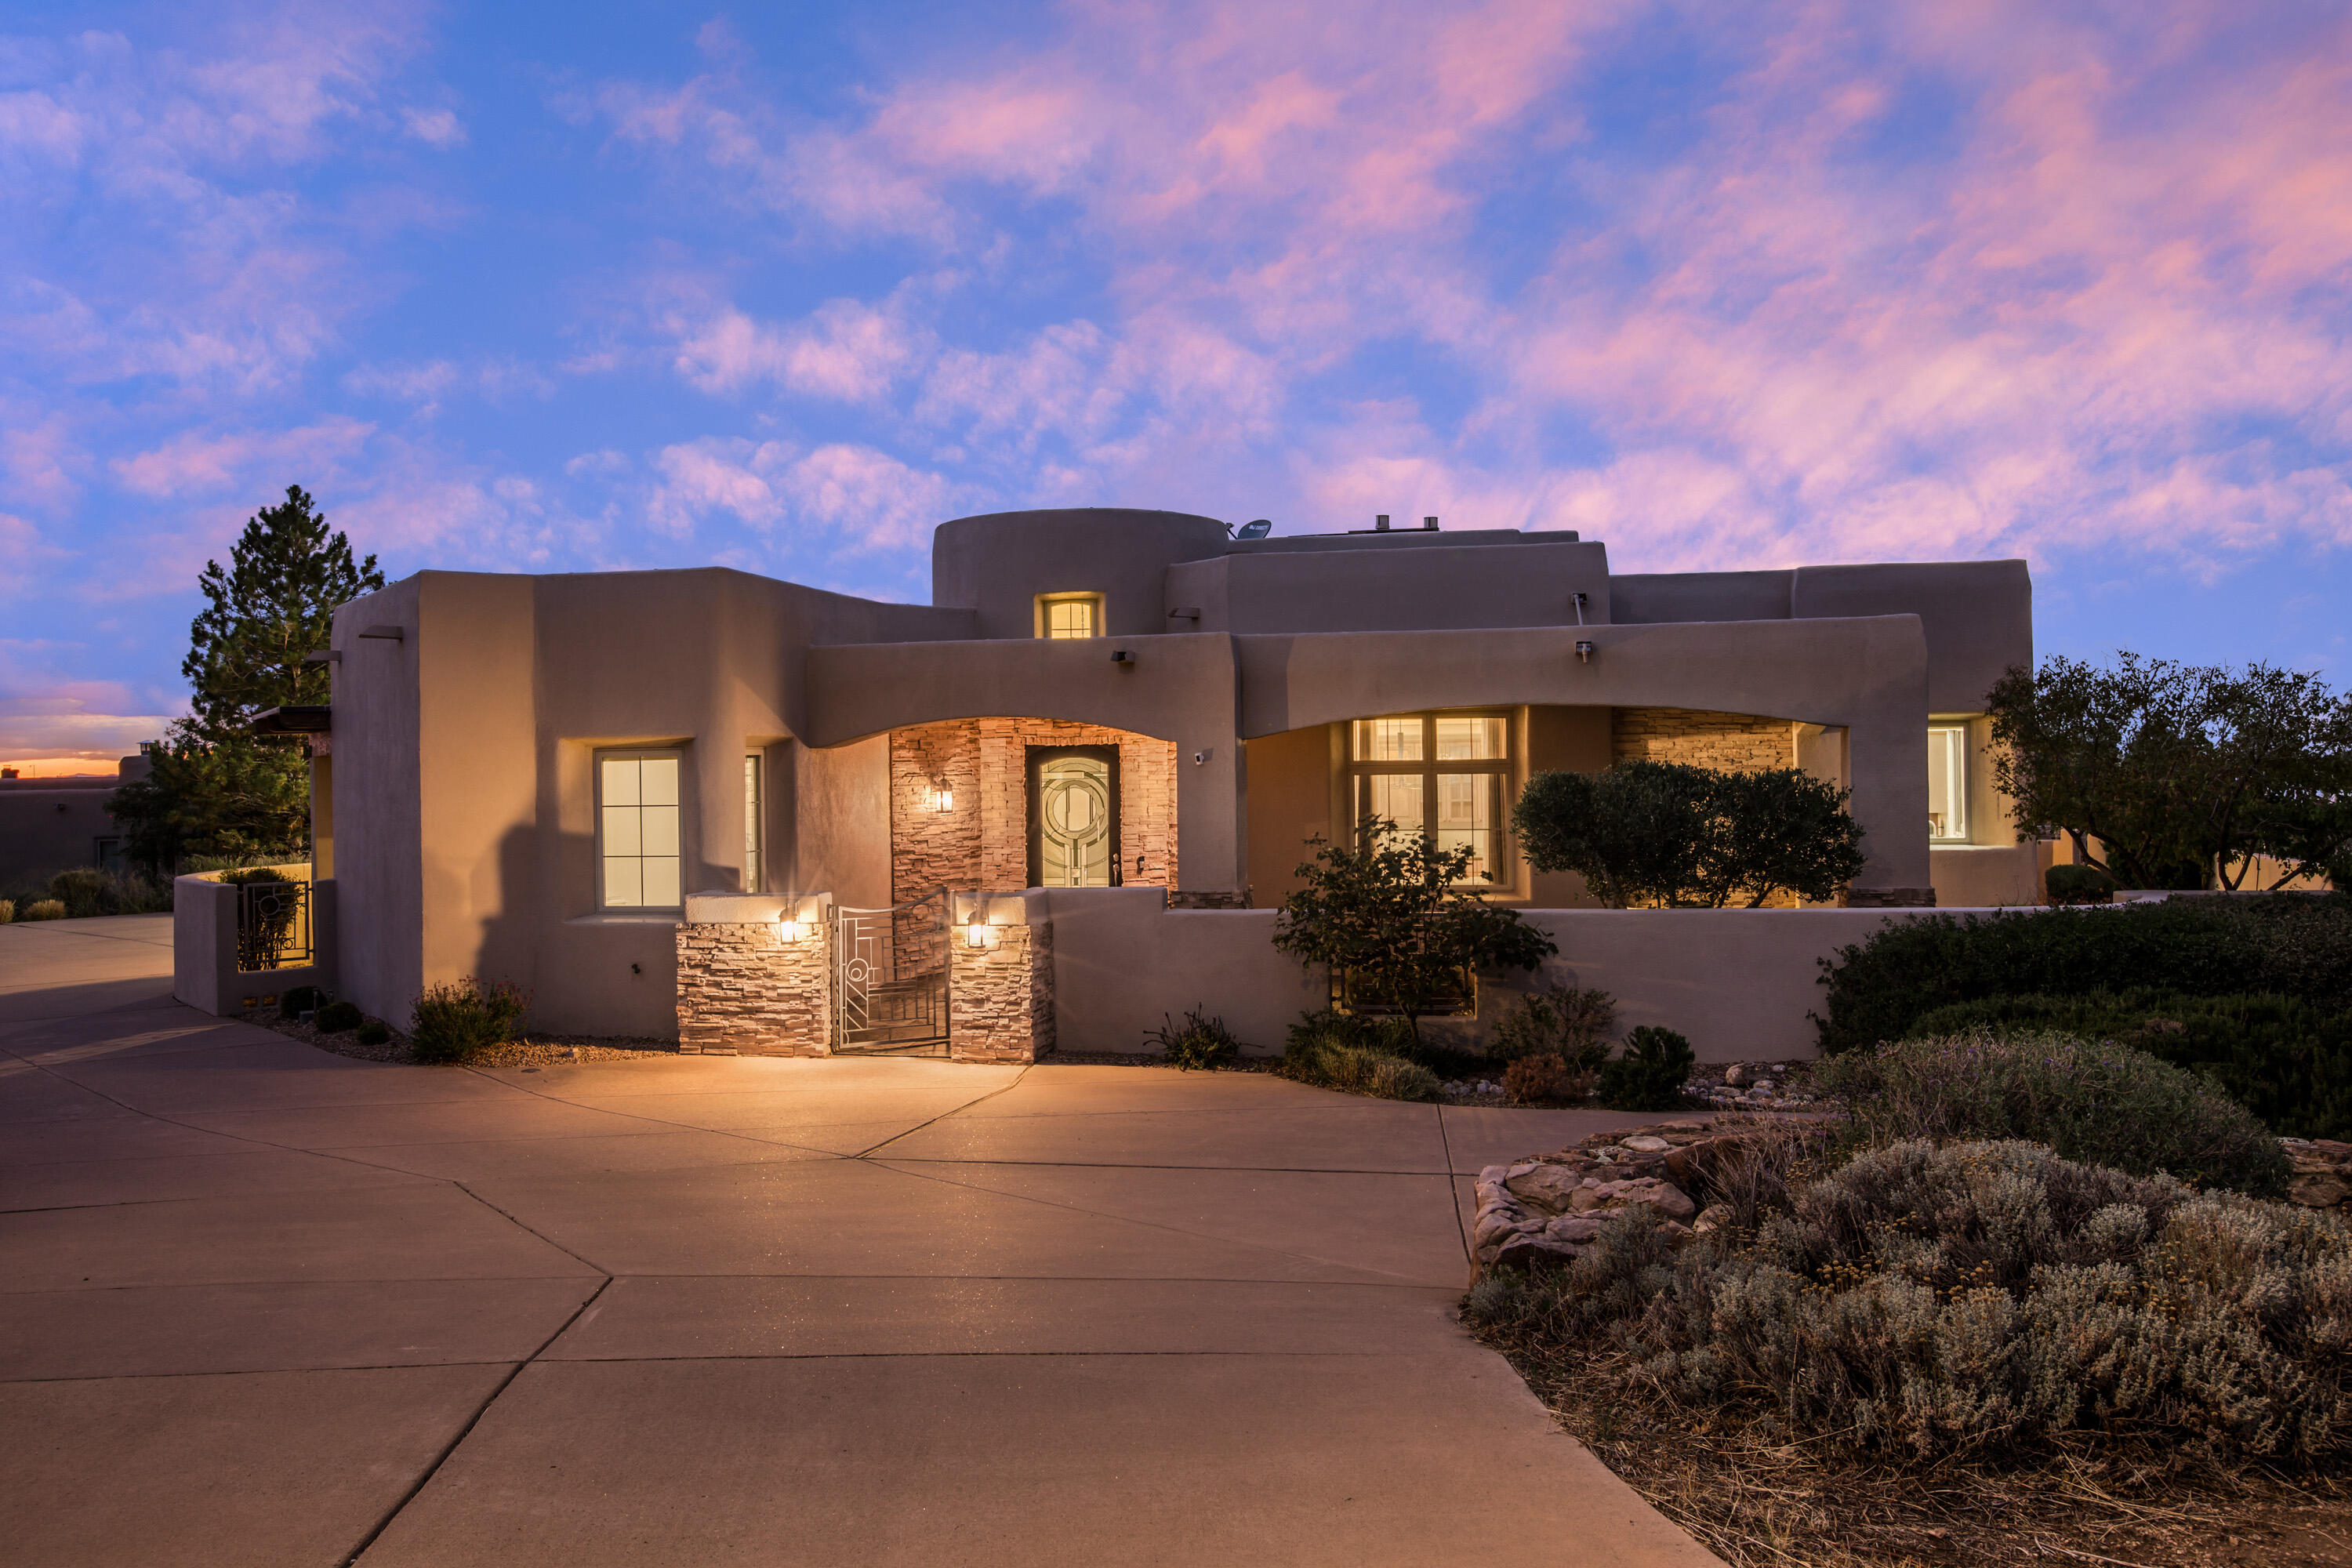 This incredible High Desert home was beautifully positioned on a cul-de-sac lot to take advantage of the views in all directions. Enjoy the beauty of the Sandia Mountains and the city lights of Albuquerque from within the home, as well as numerous outdoor patios and courtyards. This home features a bright and open floor plan with fresh white paint and updated light fixtures, offering a clean and modern aesthetic. Beautiful finishes include custom handcrafted cabinetry, stainless steel appliances, rich granite countertops, wood beams, and exterior stacked stone. Each bedroom offers an en-suite bathroom and a walk in closet. Multiple living and dining areas offer flexibility. Enjoy the convenience of this great location with access to shopping, dining, entertainment and services nearby.